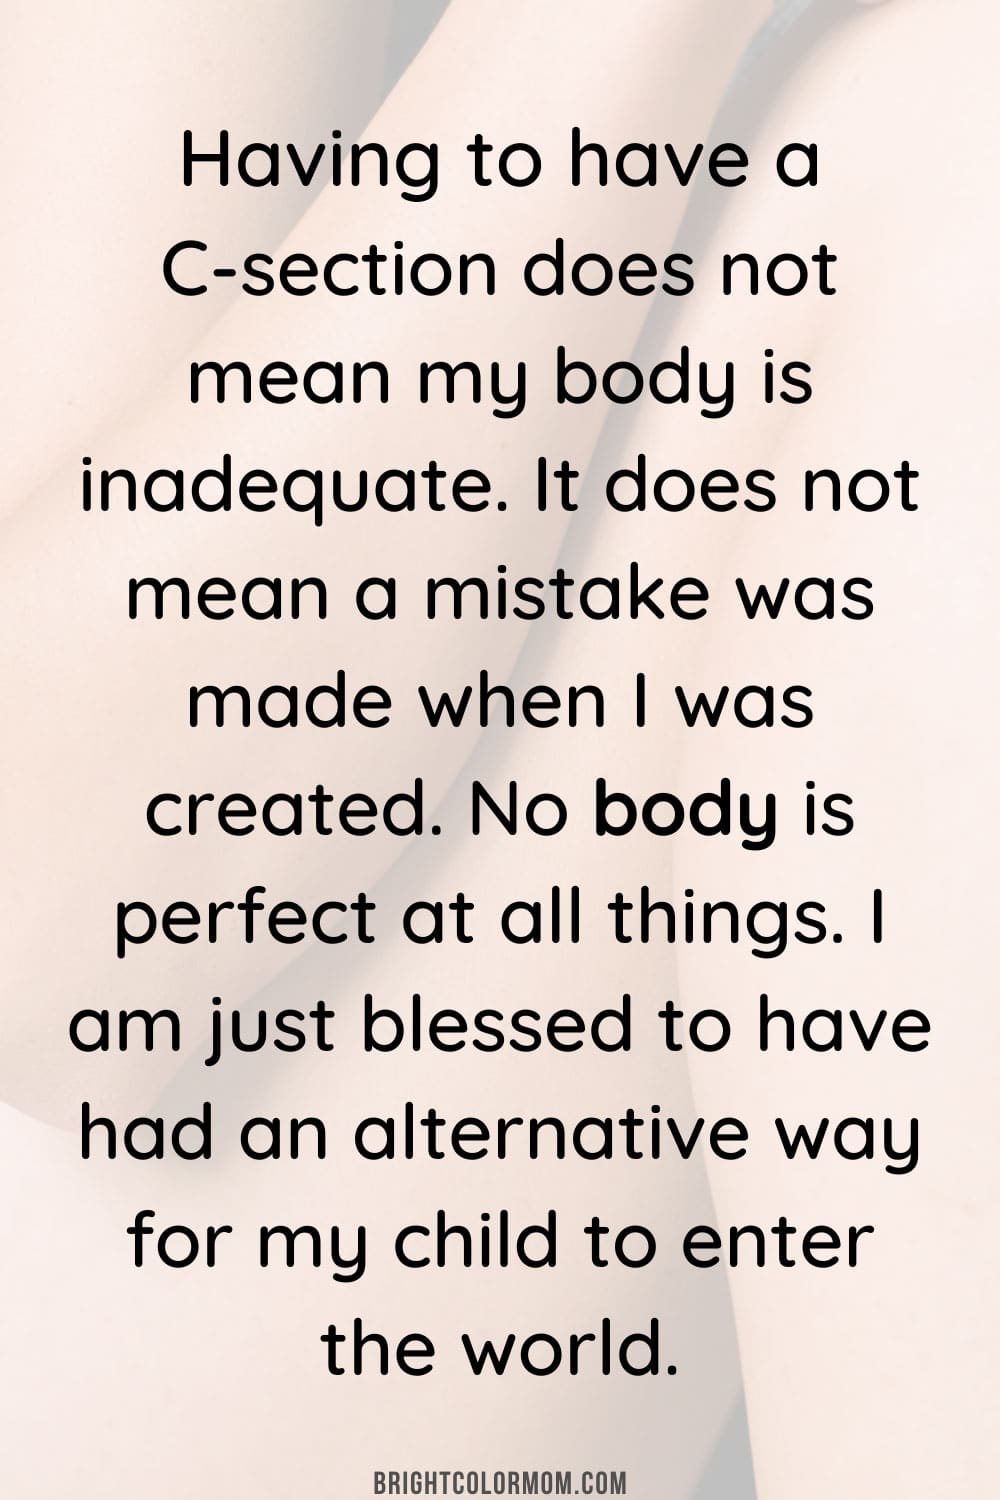 Having to have a C-section does not mean my body is inadequate. It does not mean a mistake was made when I was created. No body is perfect at all things. I am just blessed to have had an alternative way for my child to enter the world.